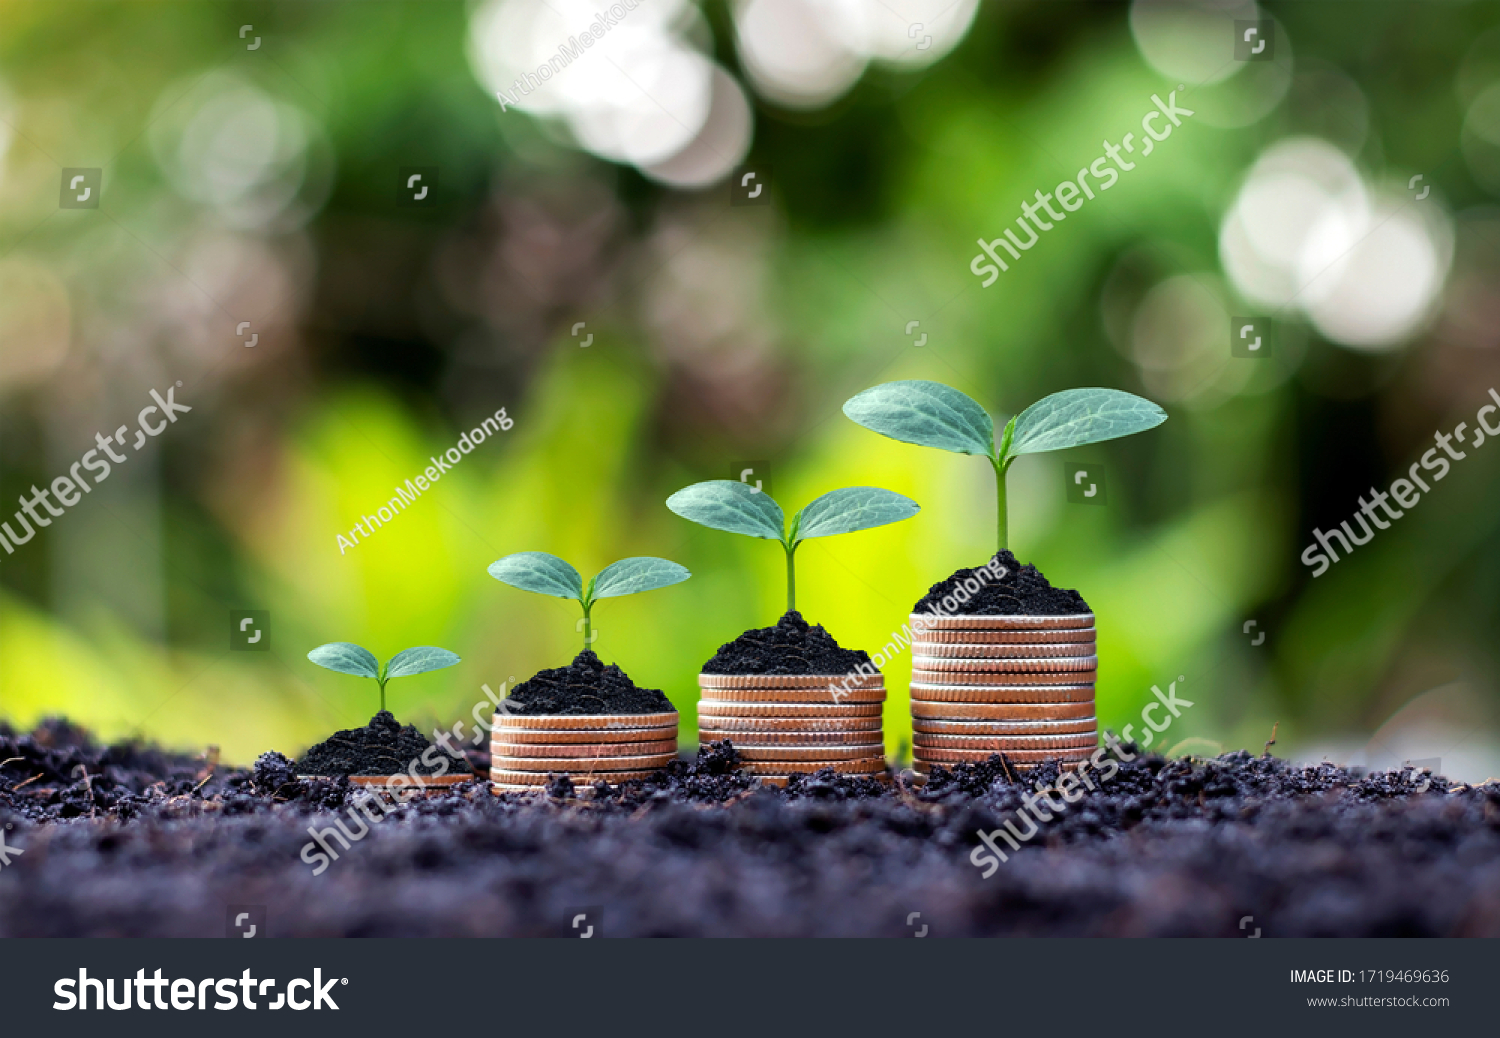 Coins and plants are grown on a pile of coins for finance and banking. The idea of saving money and increasing finances. #1719469636